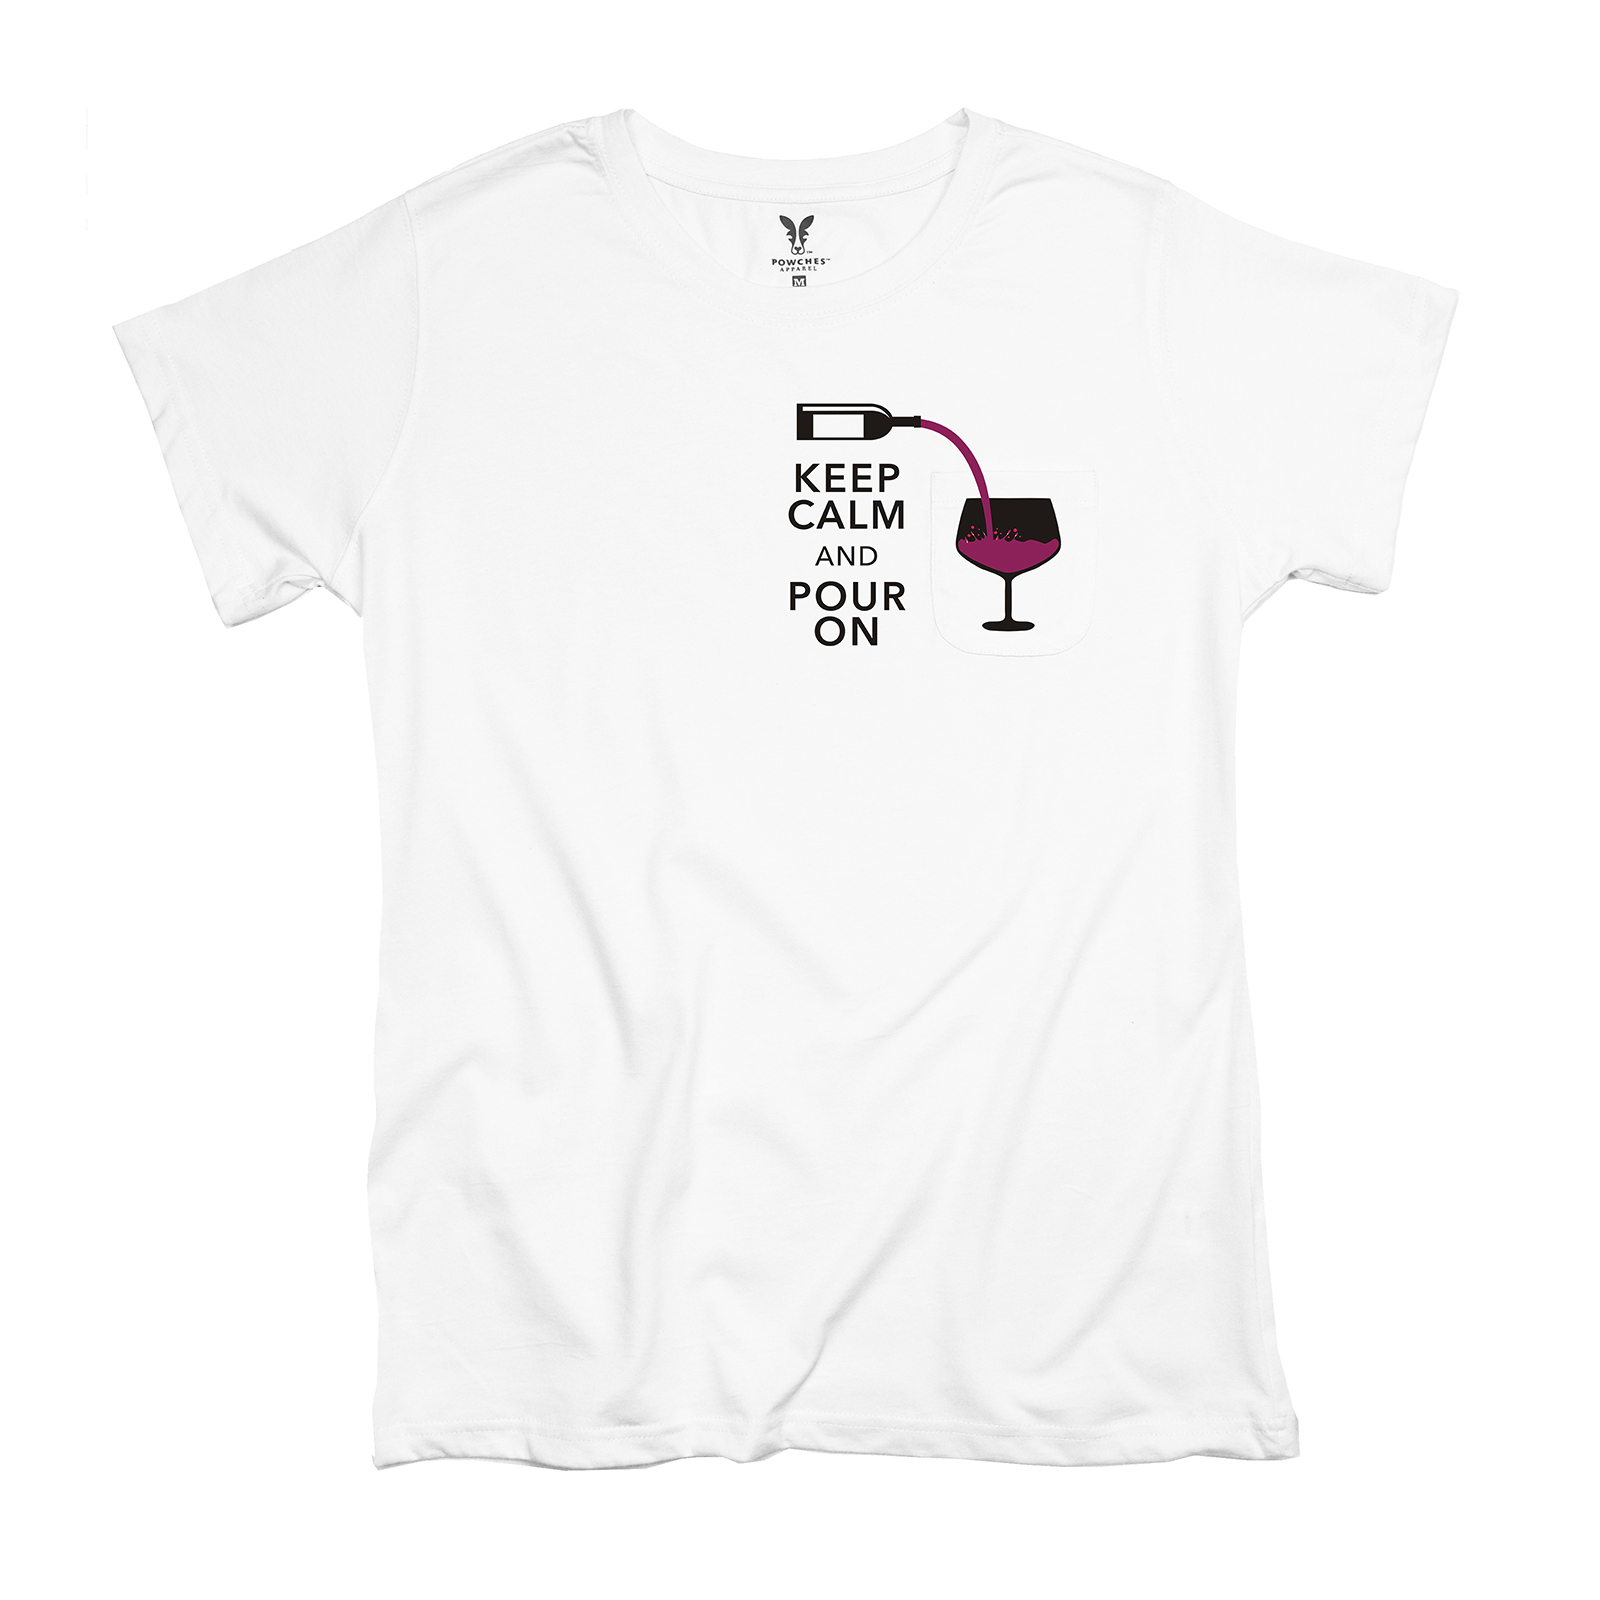 Keep Calm and Pour On Ladies Pocket T-Shirt LPT311314X